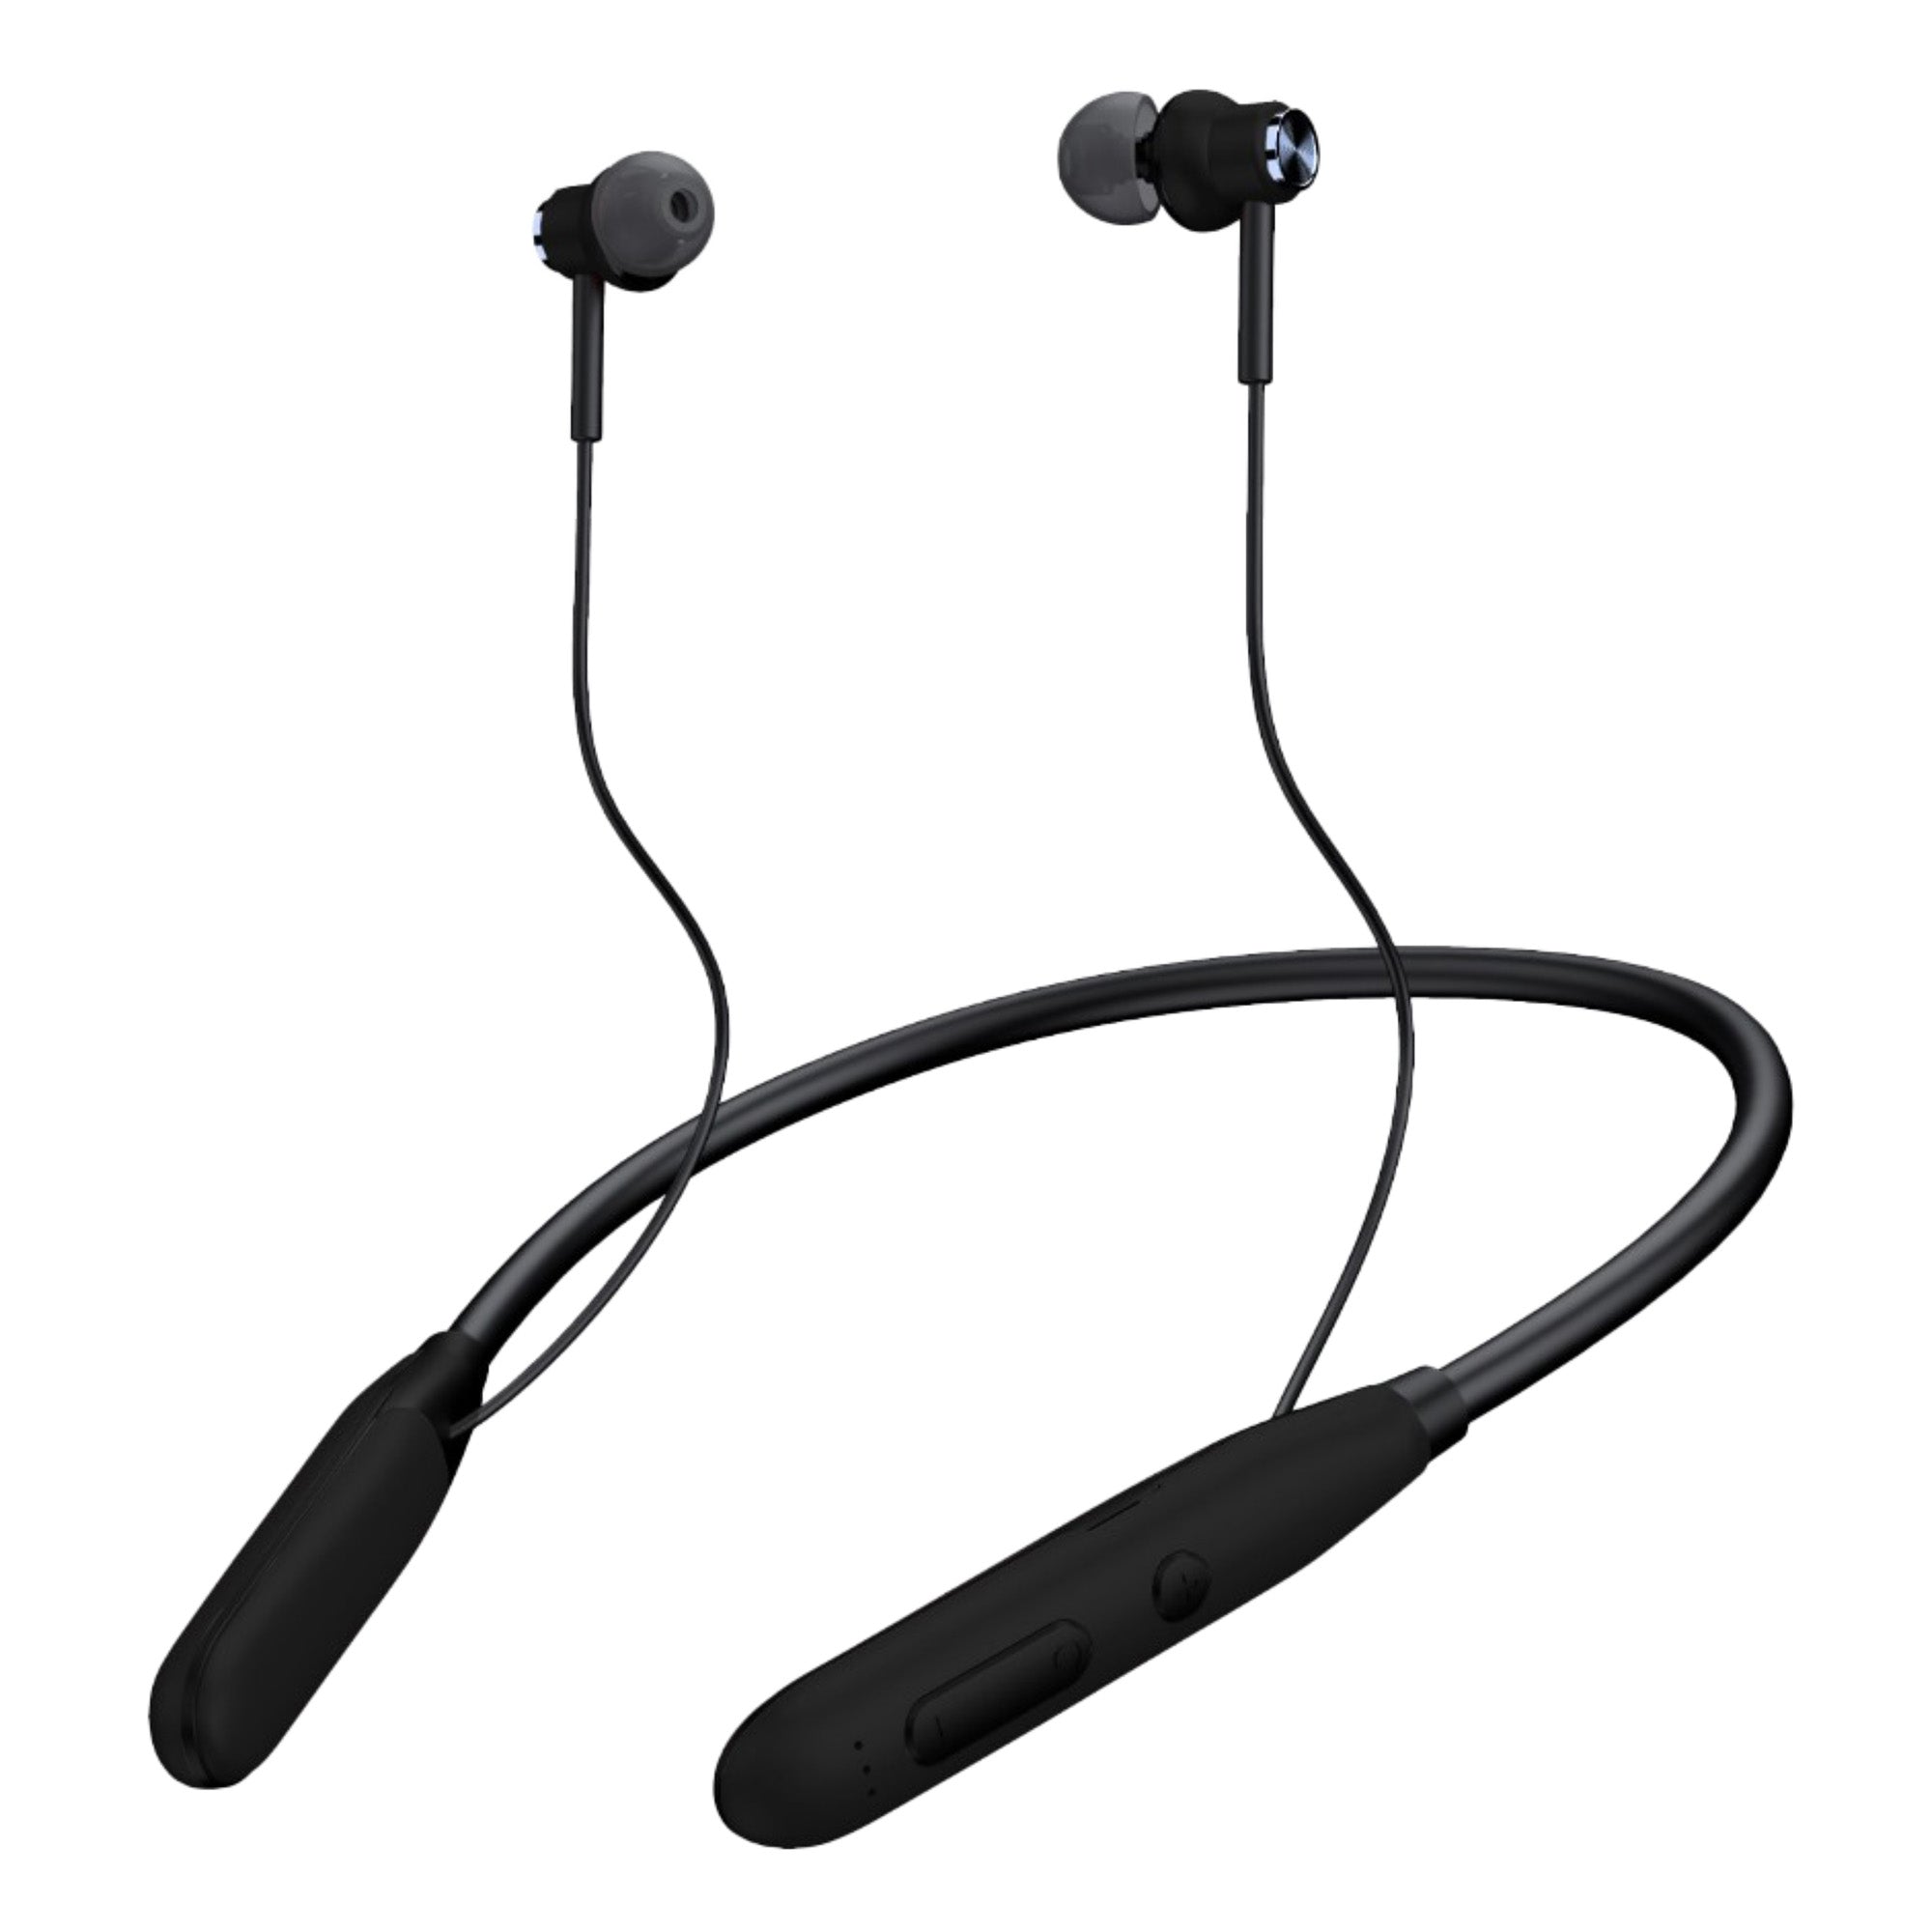 GIZMORE MN225 Wireless Bluetooth 5.0 in Ear Neckband| 20 Hours Playtime| 10 Min Charging Work Upto 2 hrs| Dual Pairing|360 Degree Surround Stereo| HD Microphone & Magnetic Earphone (Black)